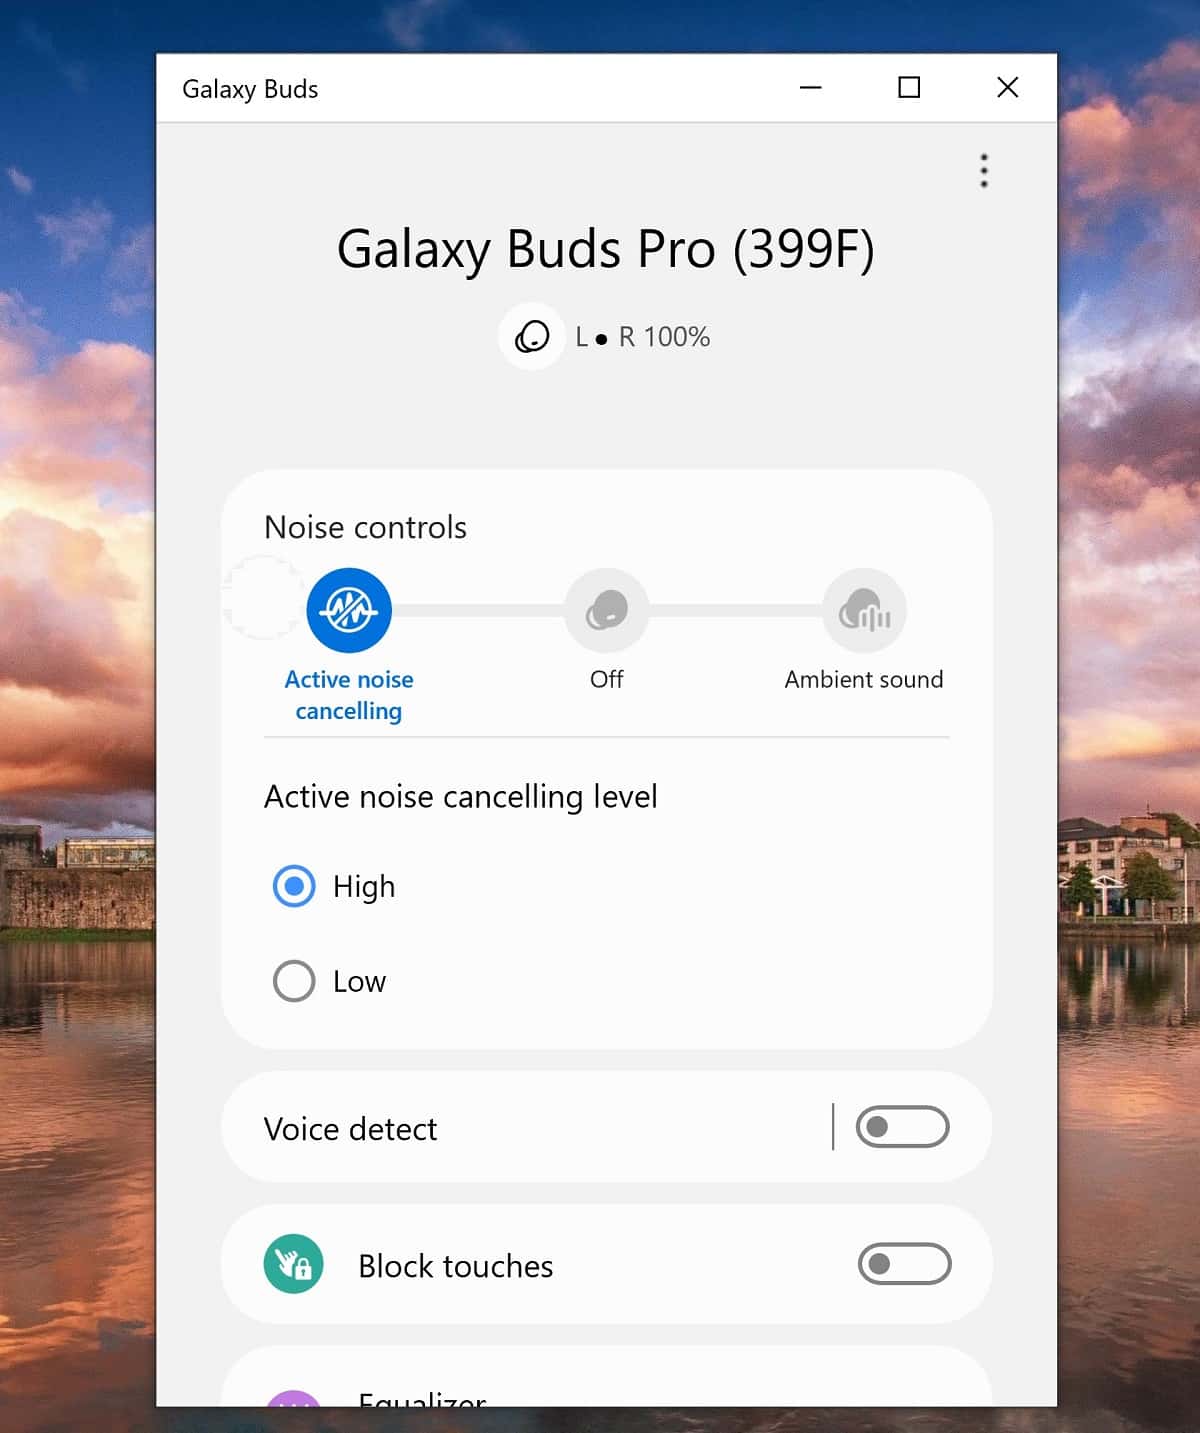 Download galaxy buds app for windows hp pavilion software download